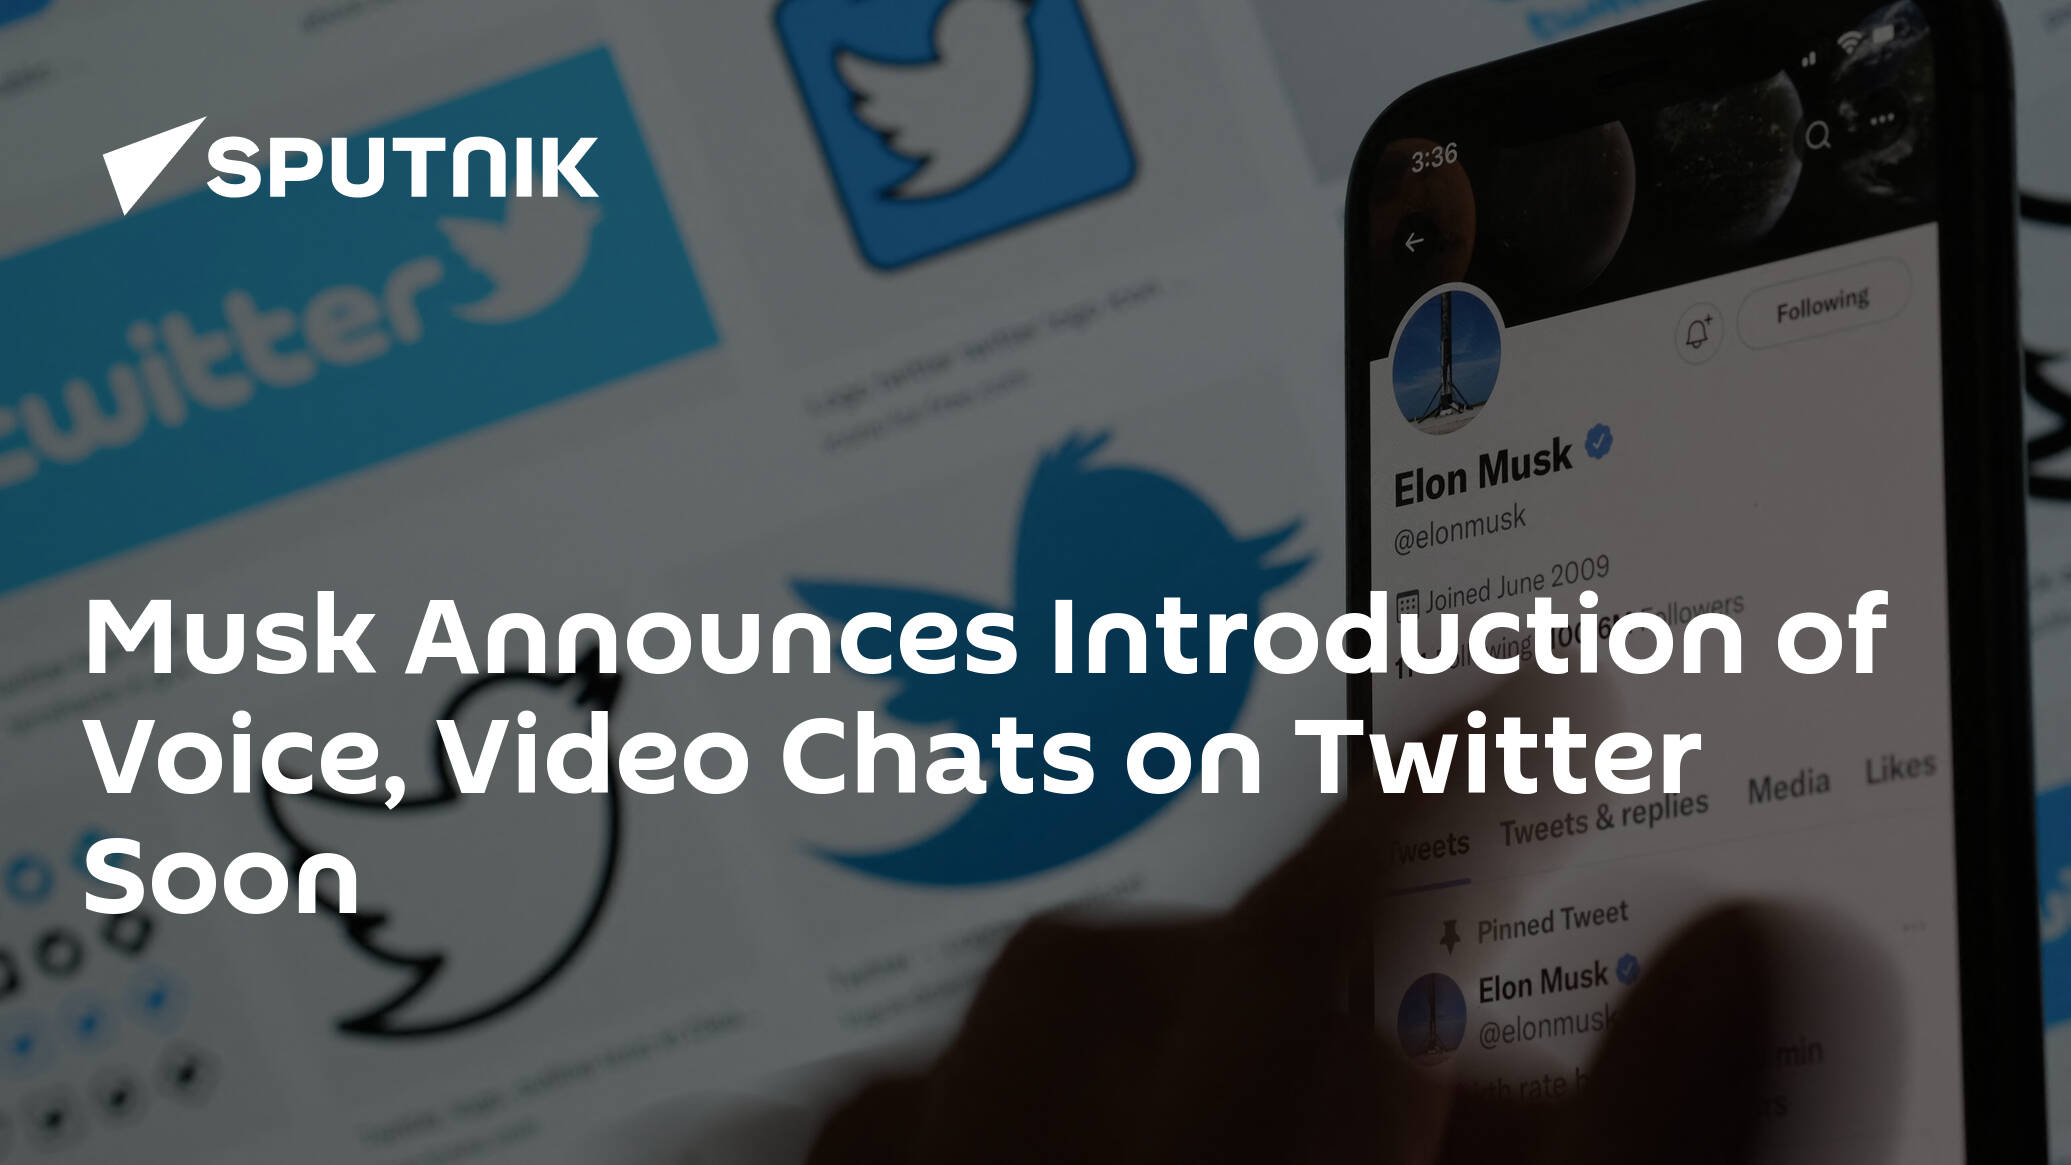 Musk Announces Introduction of Voice, Video Chats on Twitter Soon